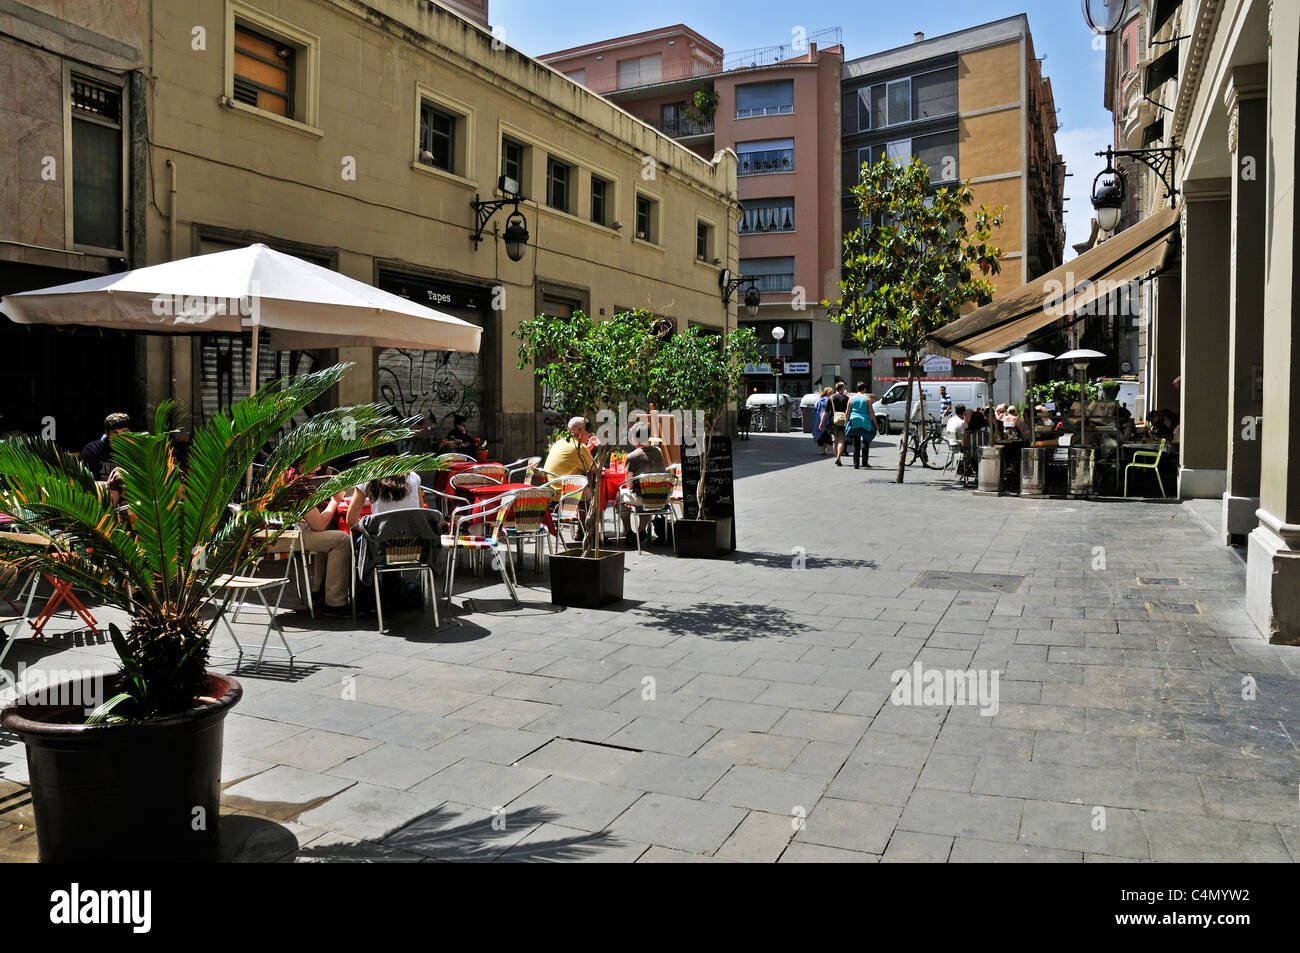 A pleasant sunny paved square where diners can eat at an outdoor restaurant in a traffic free environment Stock Photo